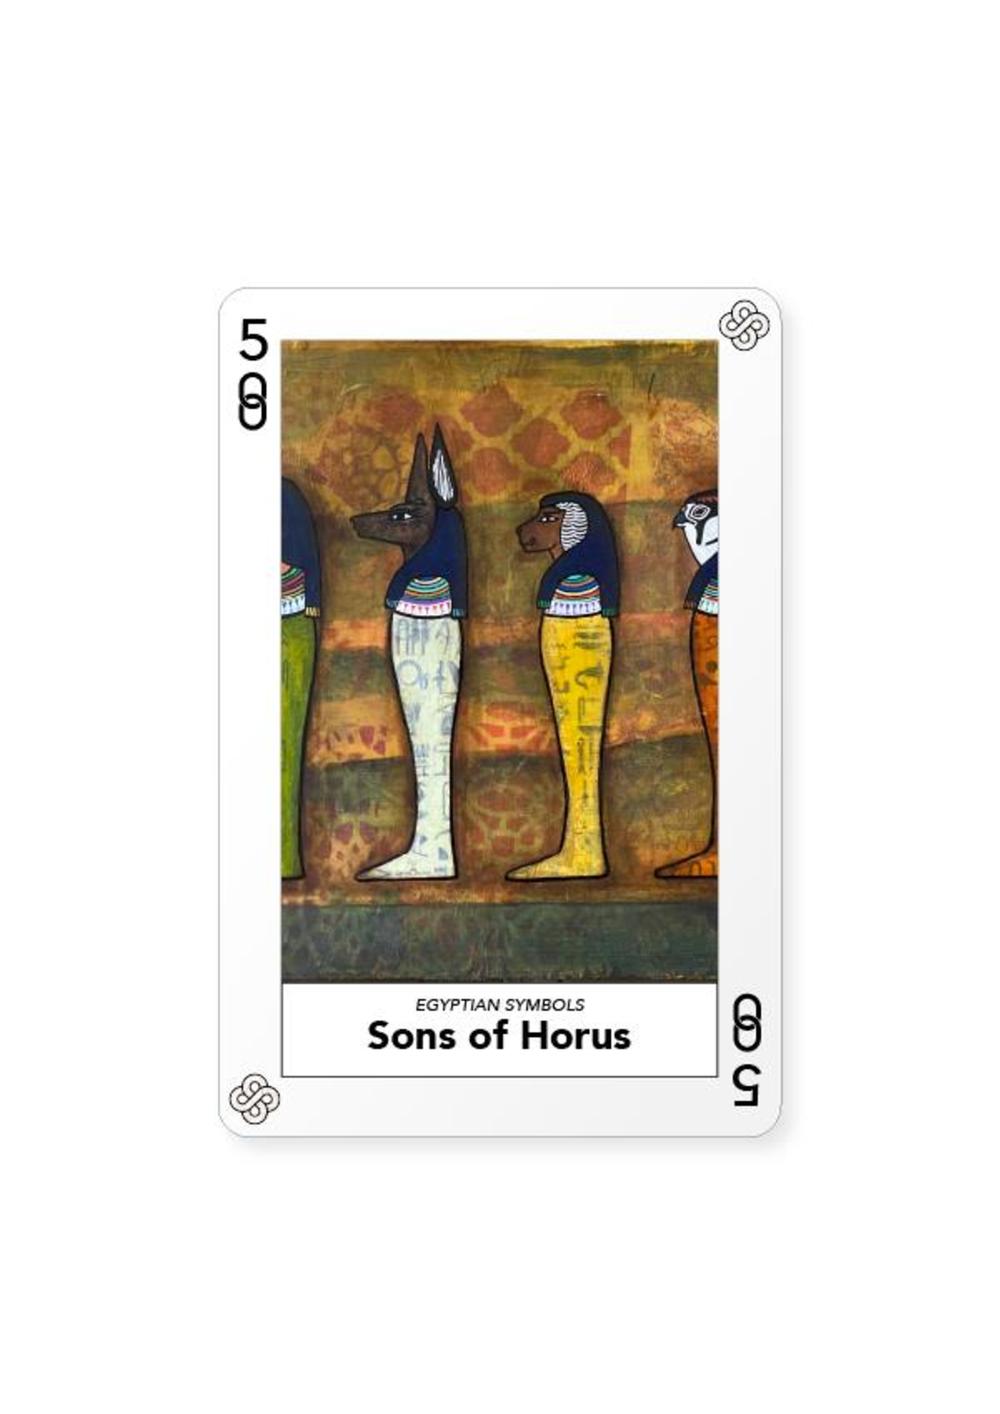 Certificate of Authenticity and Consignment - Sons of Horus